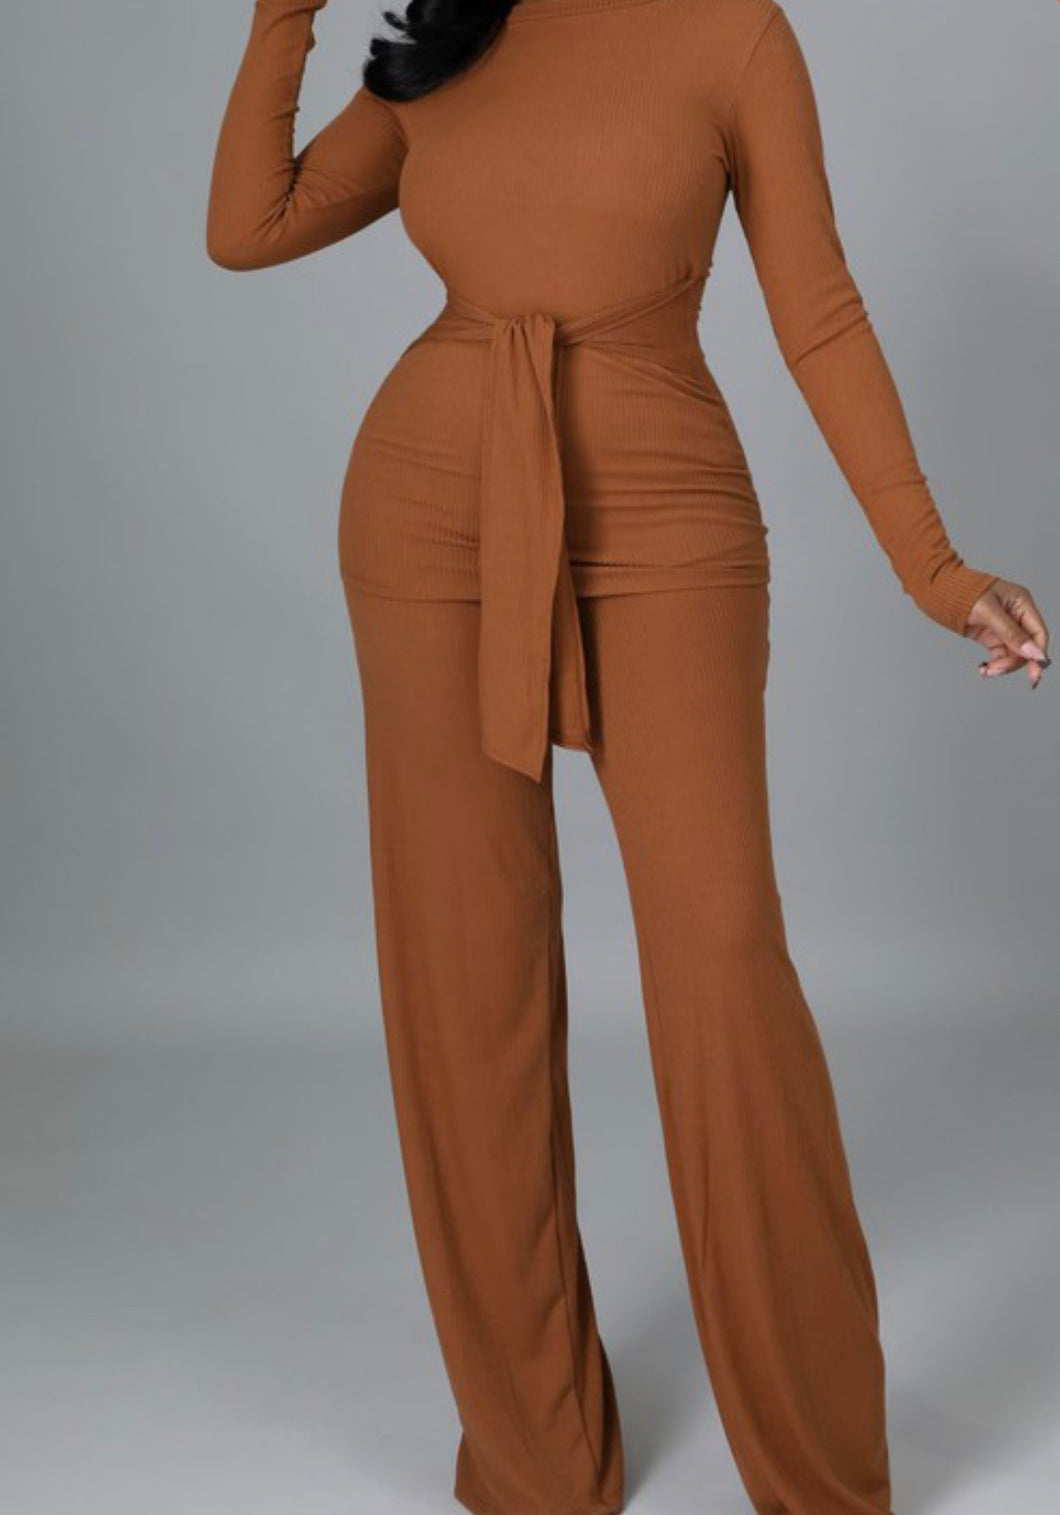 Coffee Flare Bottoms Pants Set (New Arrivals)